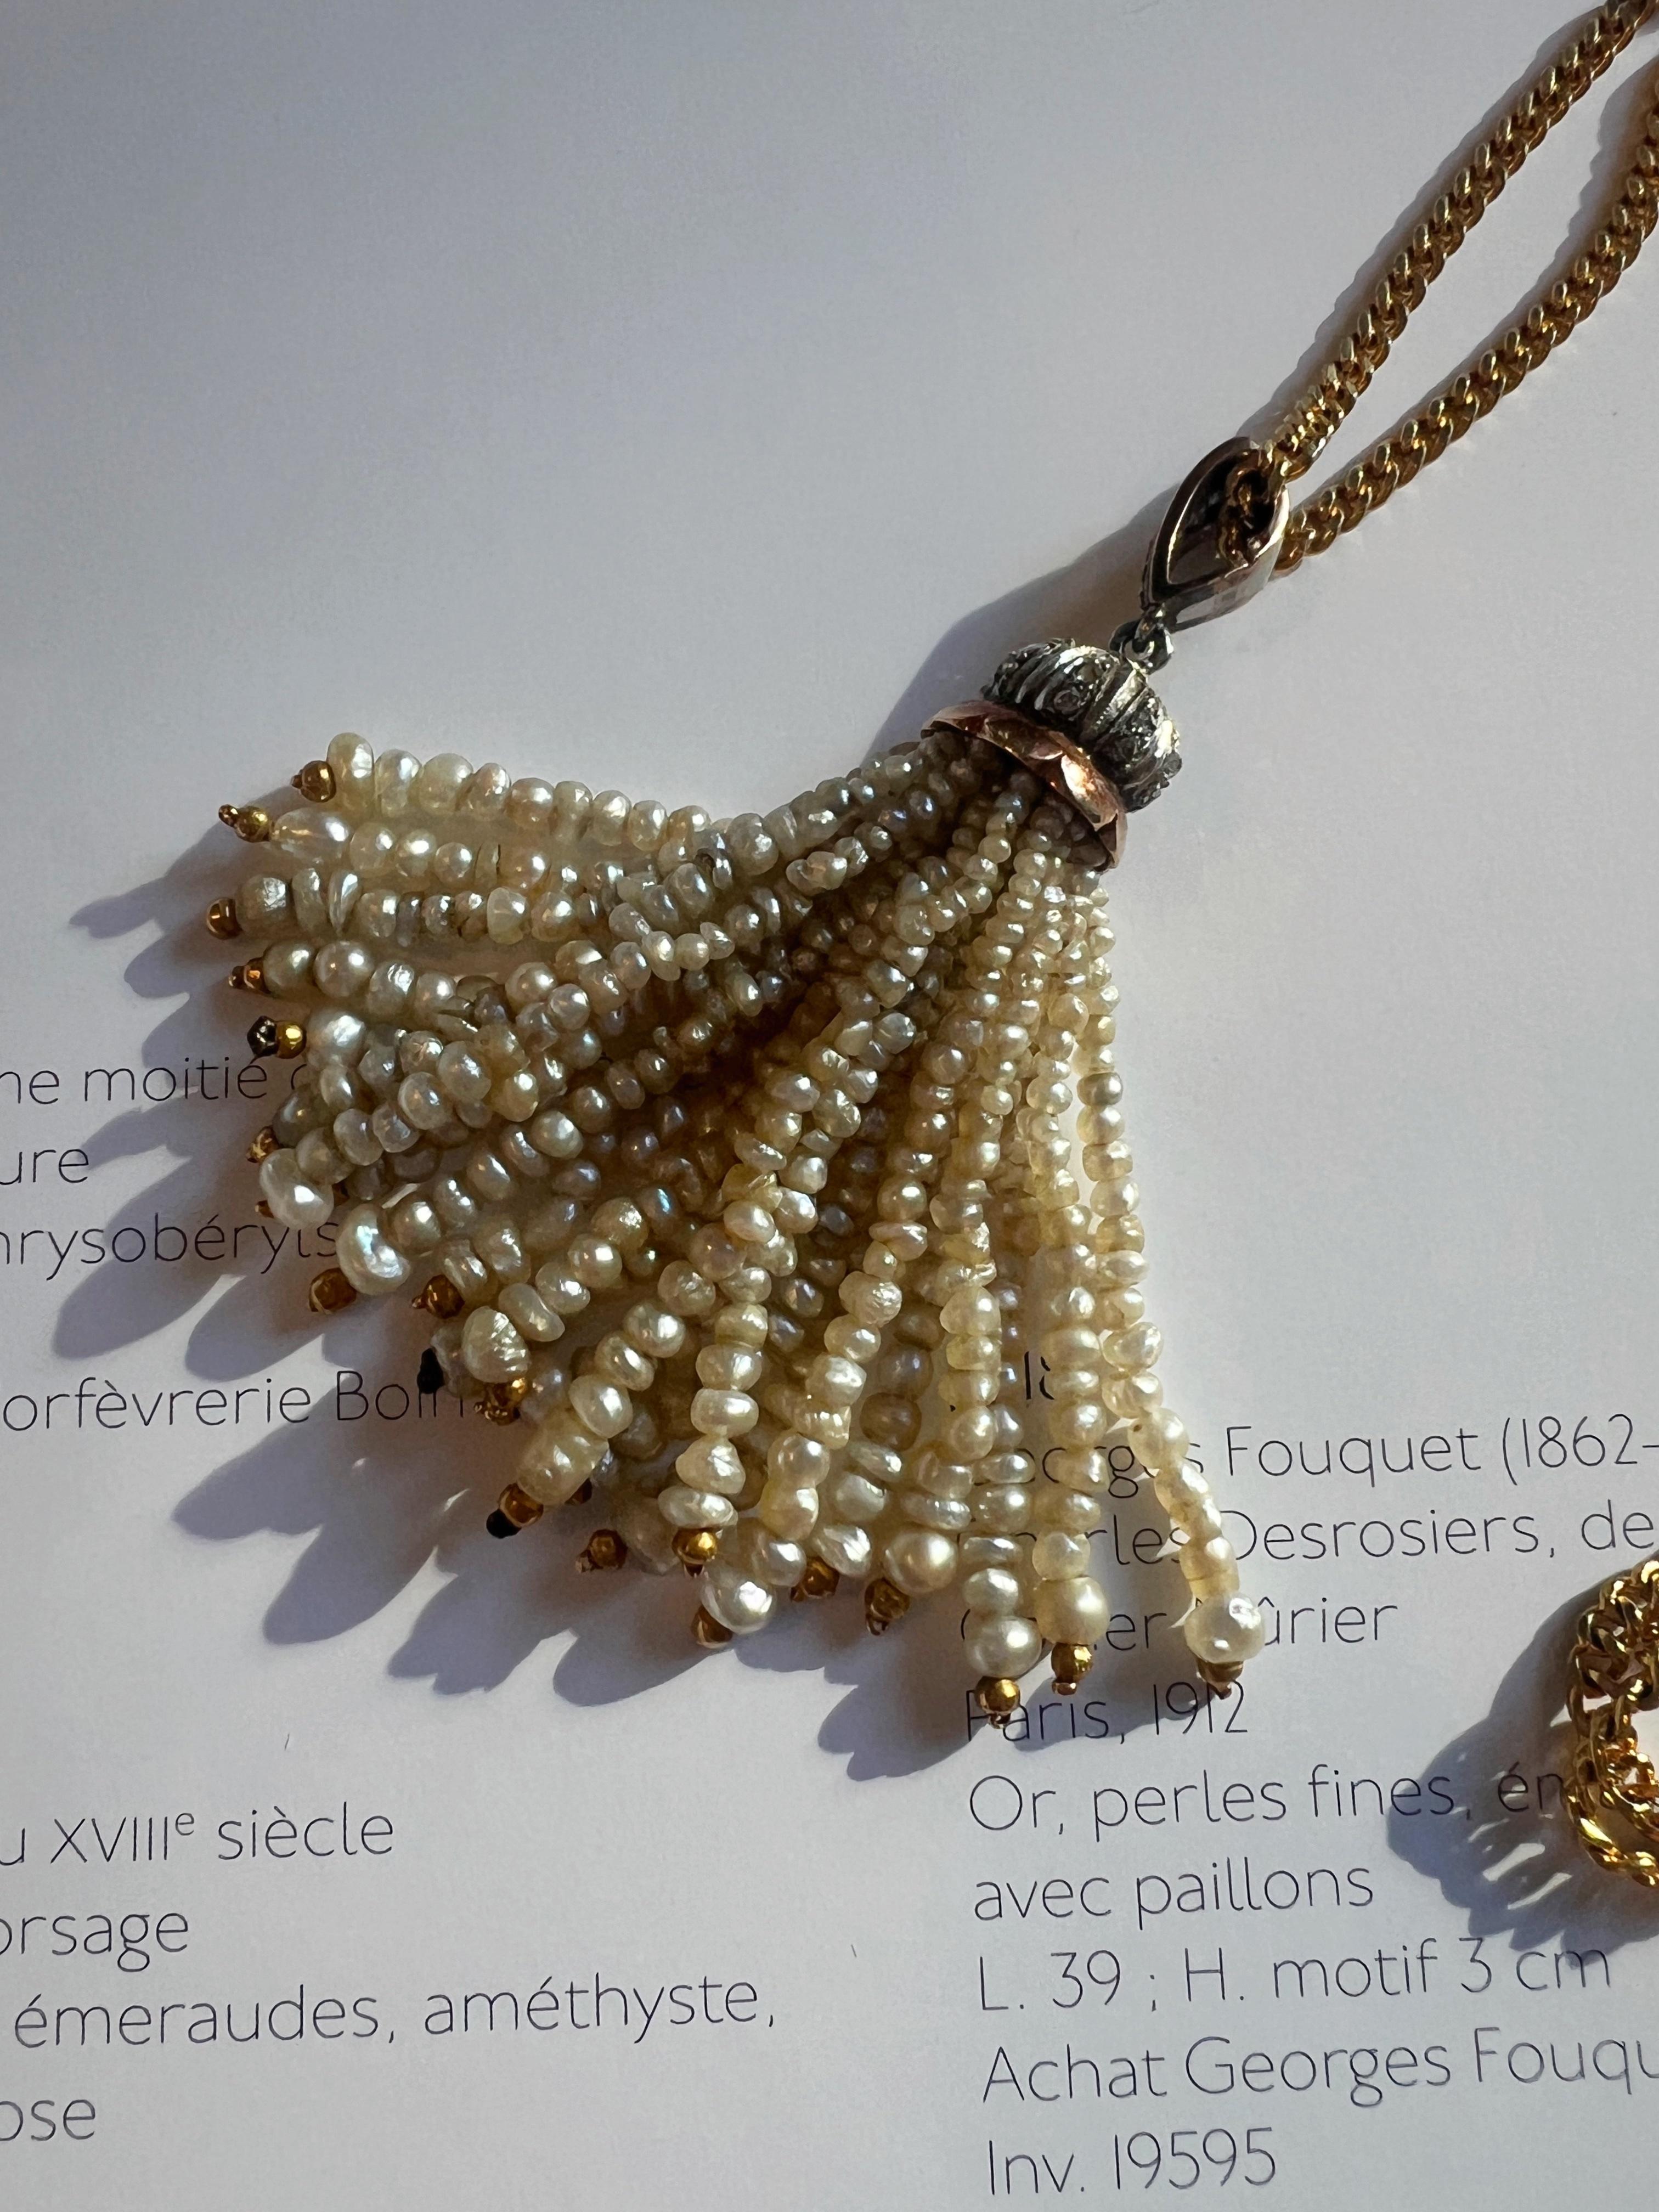 For sale a beautiful Art Deco era tassel pendant featuring 23 strings of white natural pearl beads, above which sits the rose cut diamond-encrusted motif. Evoking the glamour and glitz of the 1920s, this very chic one-of-a-kind tassel is the